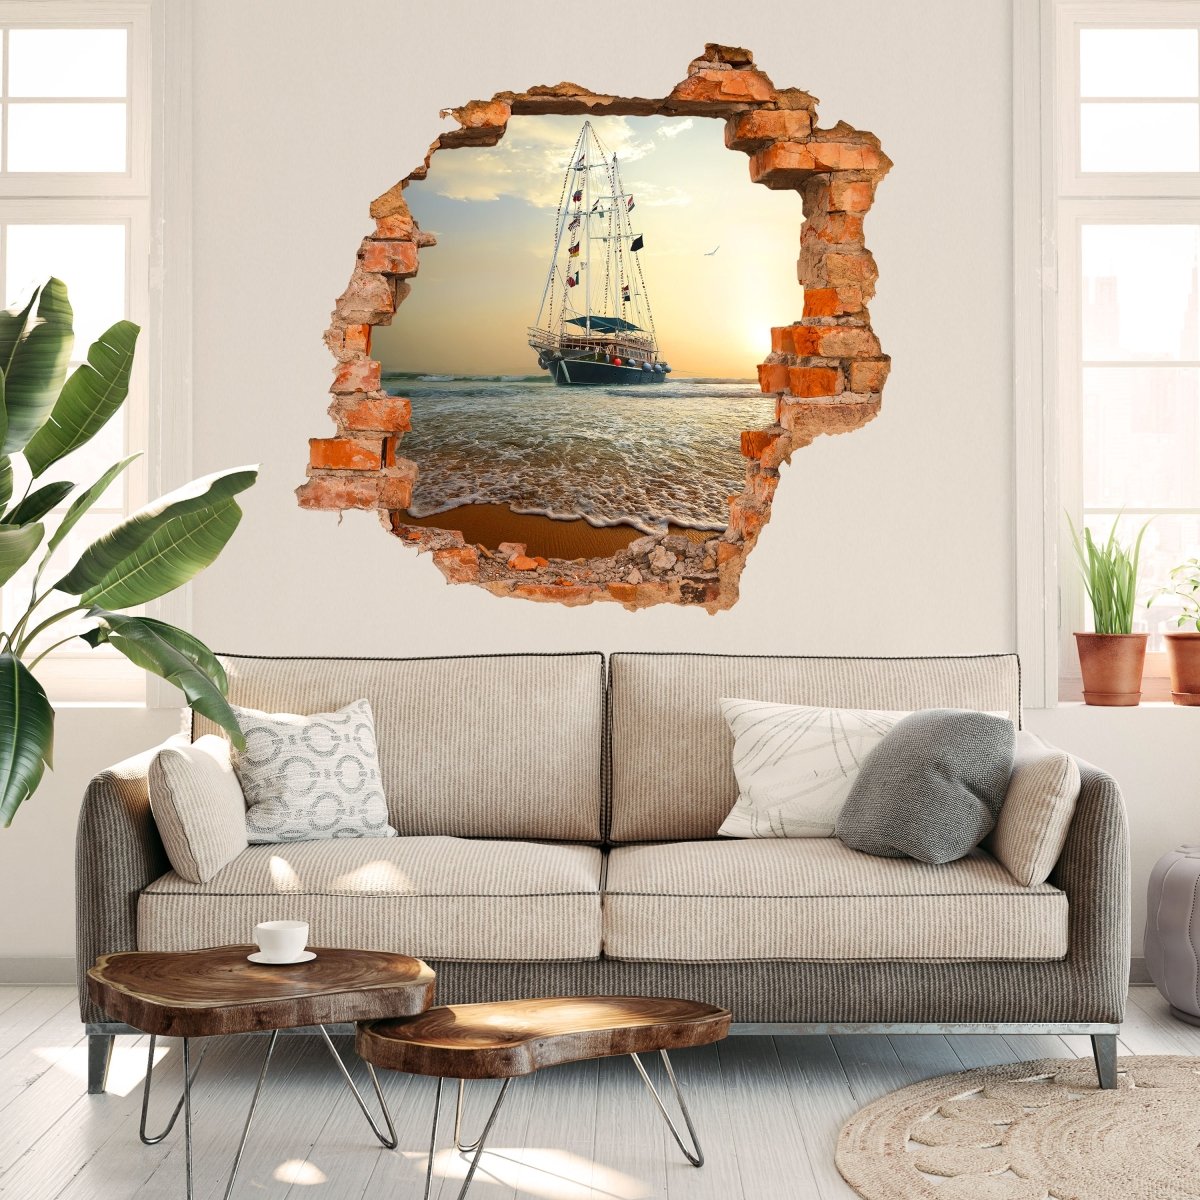 3D wall sticker sailing ship on the waves - Wall Decal M0855